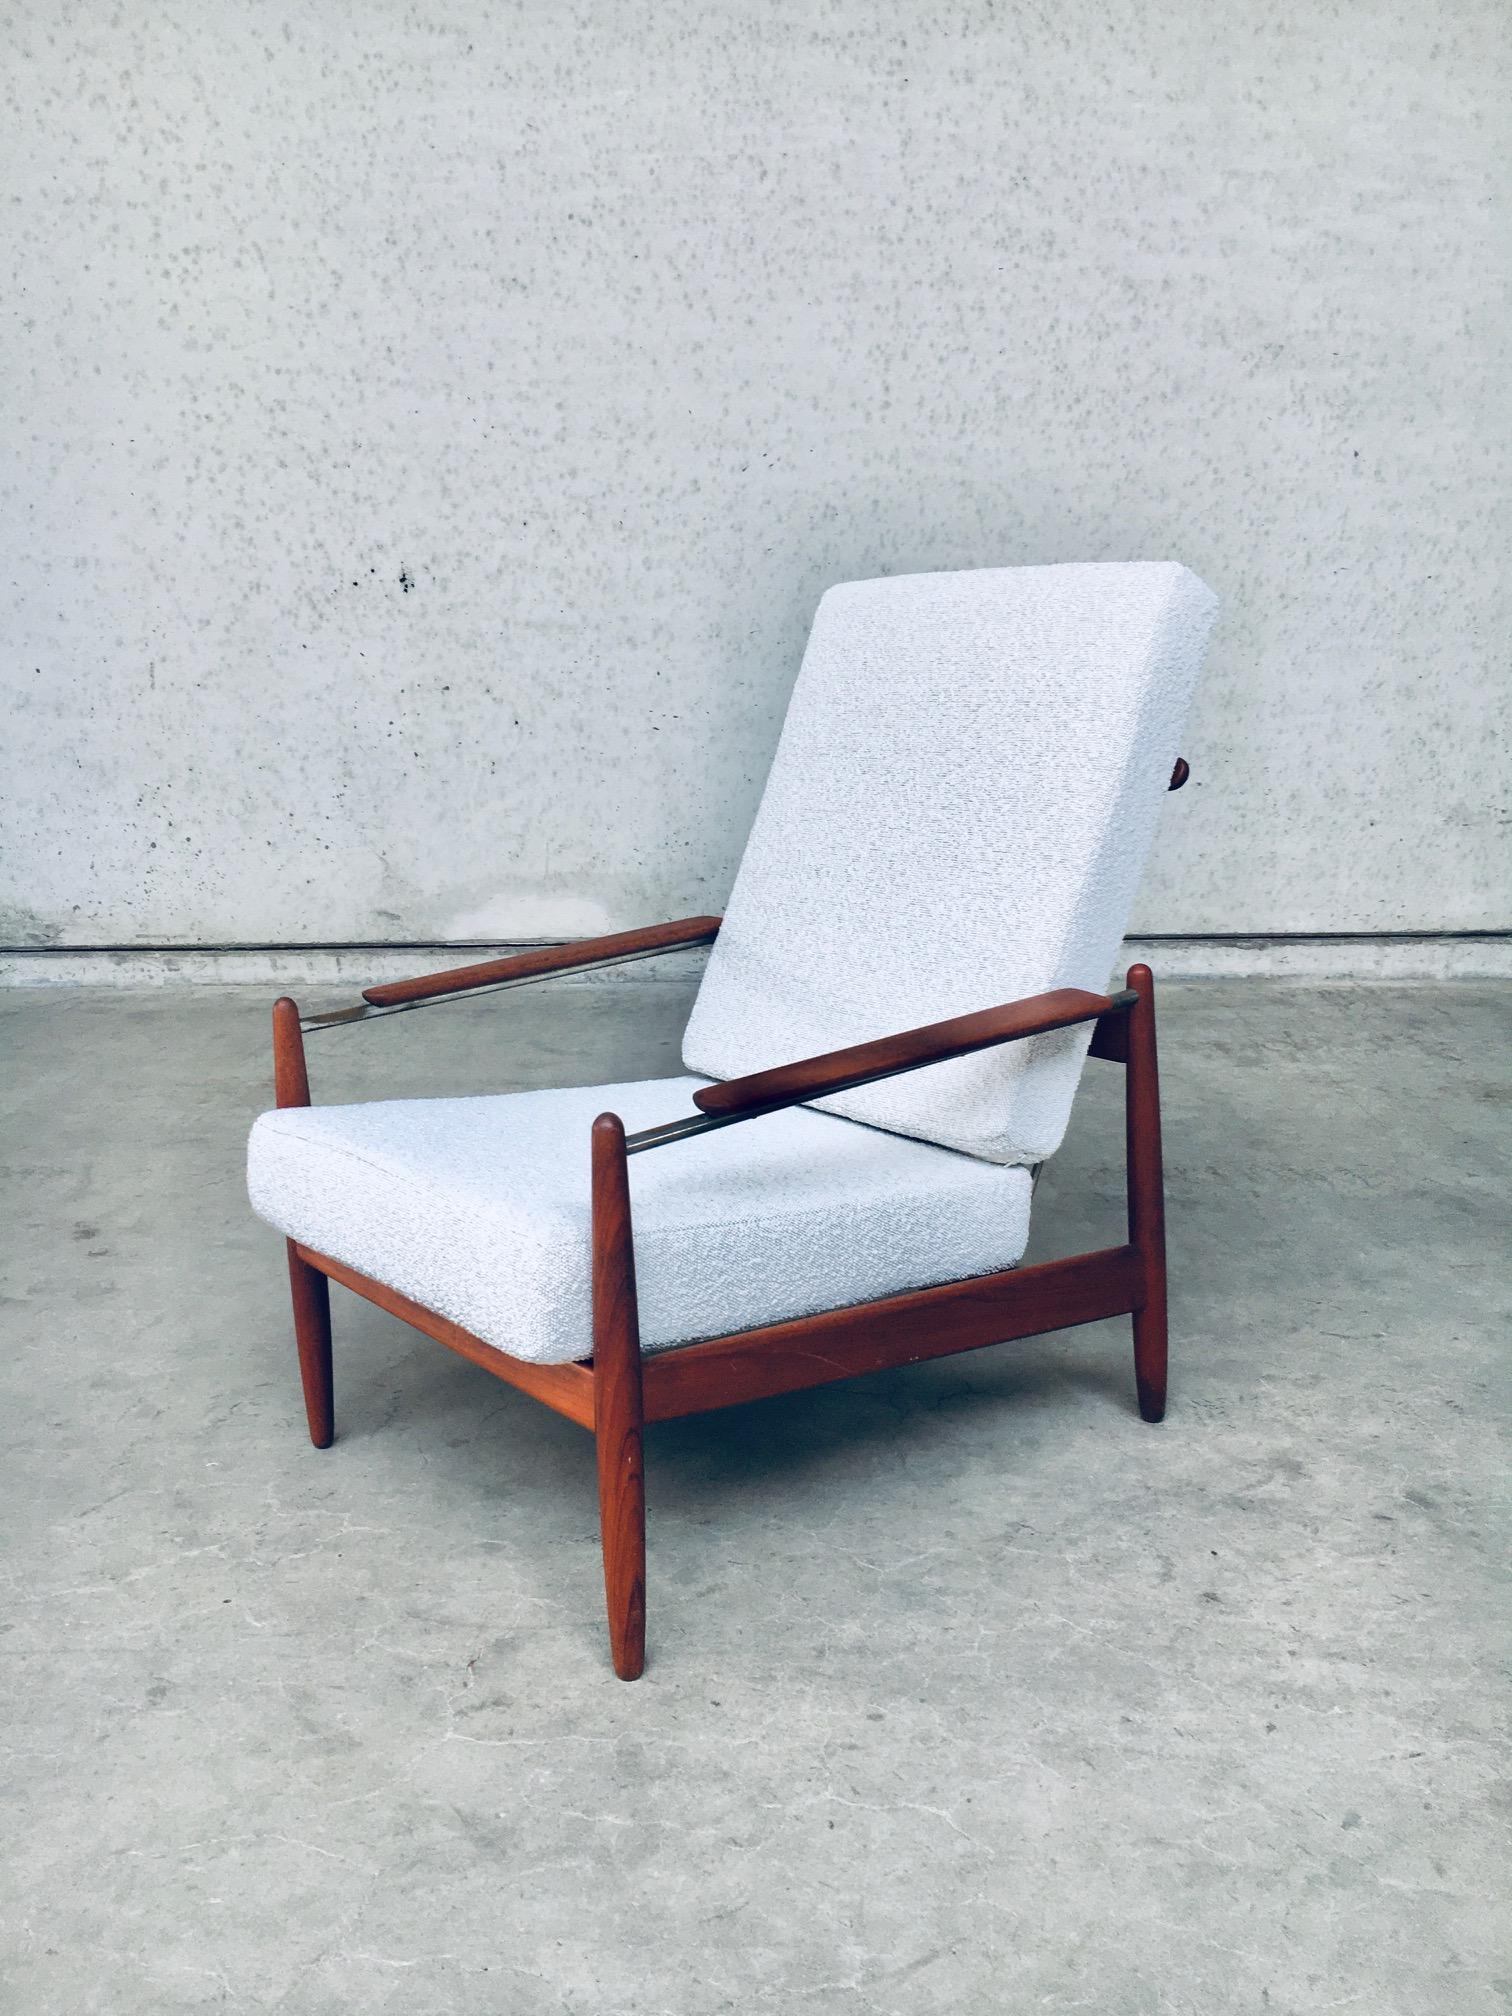 Vintage Mid-Century Modern Scandinavian design armchair Fauteuil, made in Denmark 1960's. Teak and metal frame with boucle reupholstered original cushions. Teak floating armrests on metal tube frame. Rare combination in use of materials. Beautiful